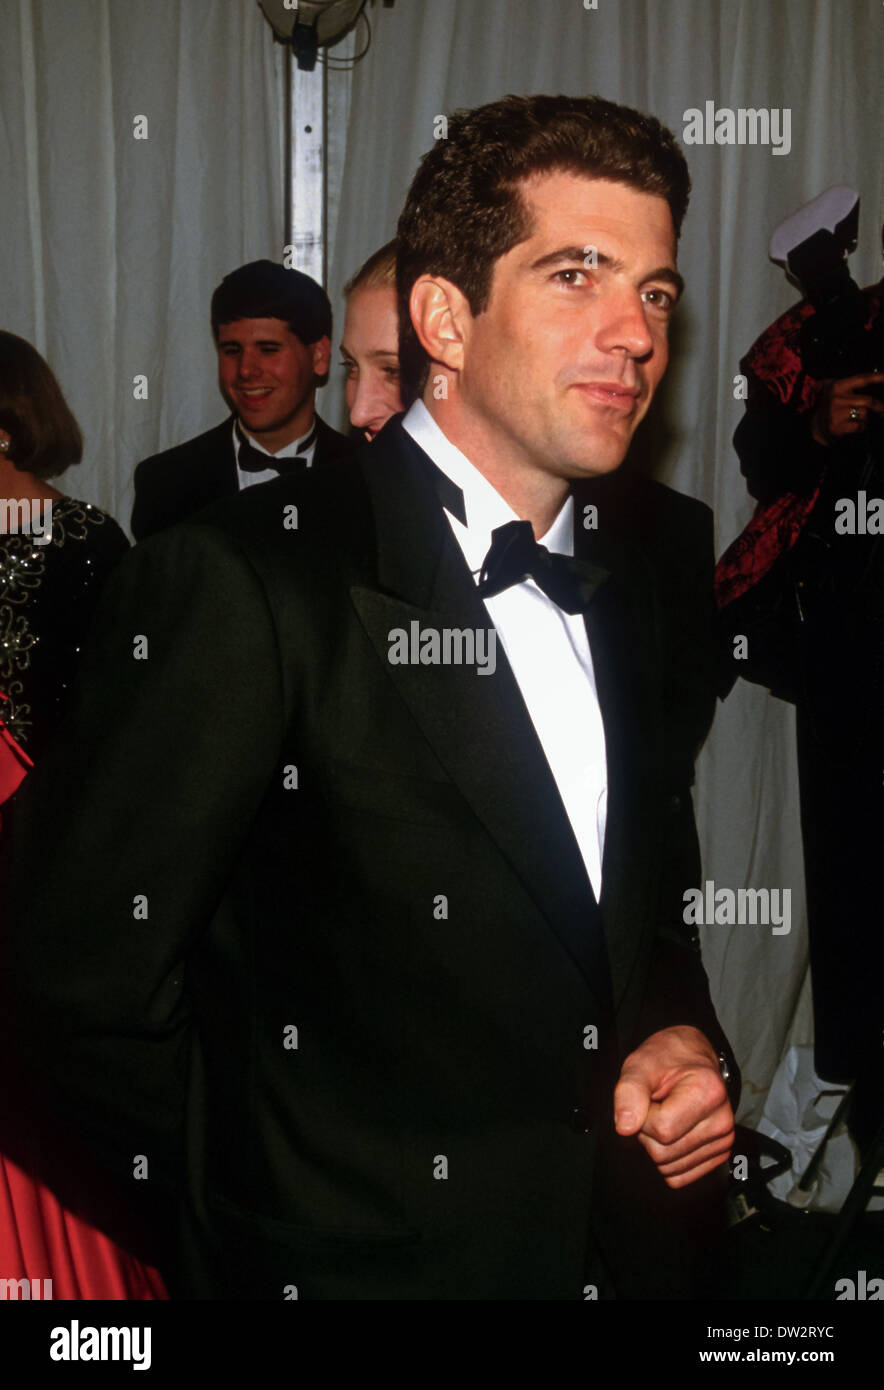 John Kennedy, jr arrives for the State Dinner for the British Prime Tony Blair Minister February 5, 1998 at the White House in Washington, DC. Stock Photo